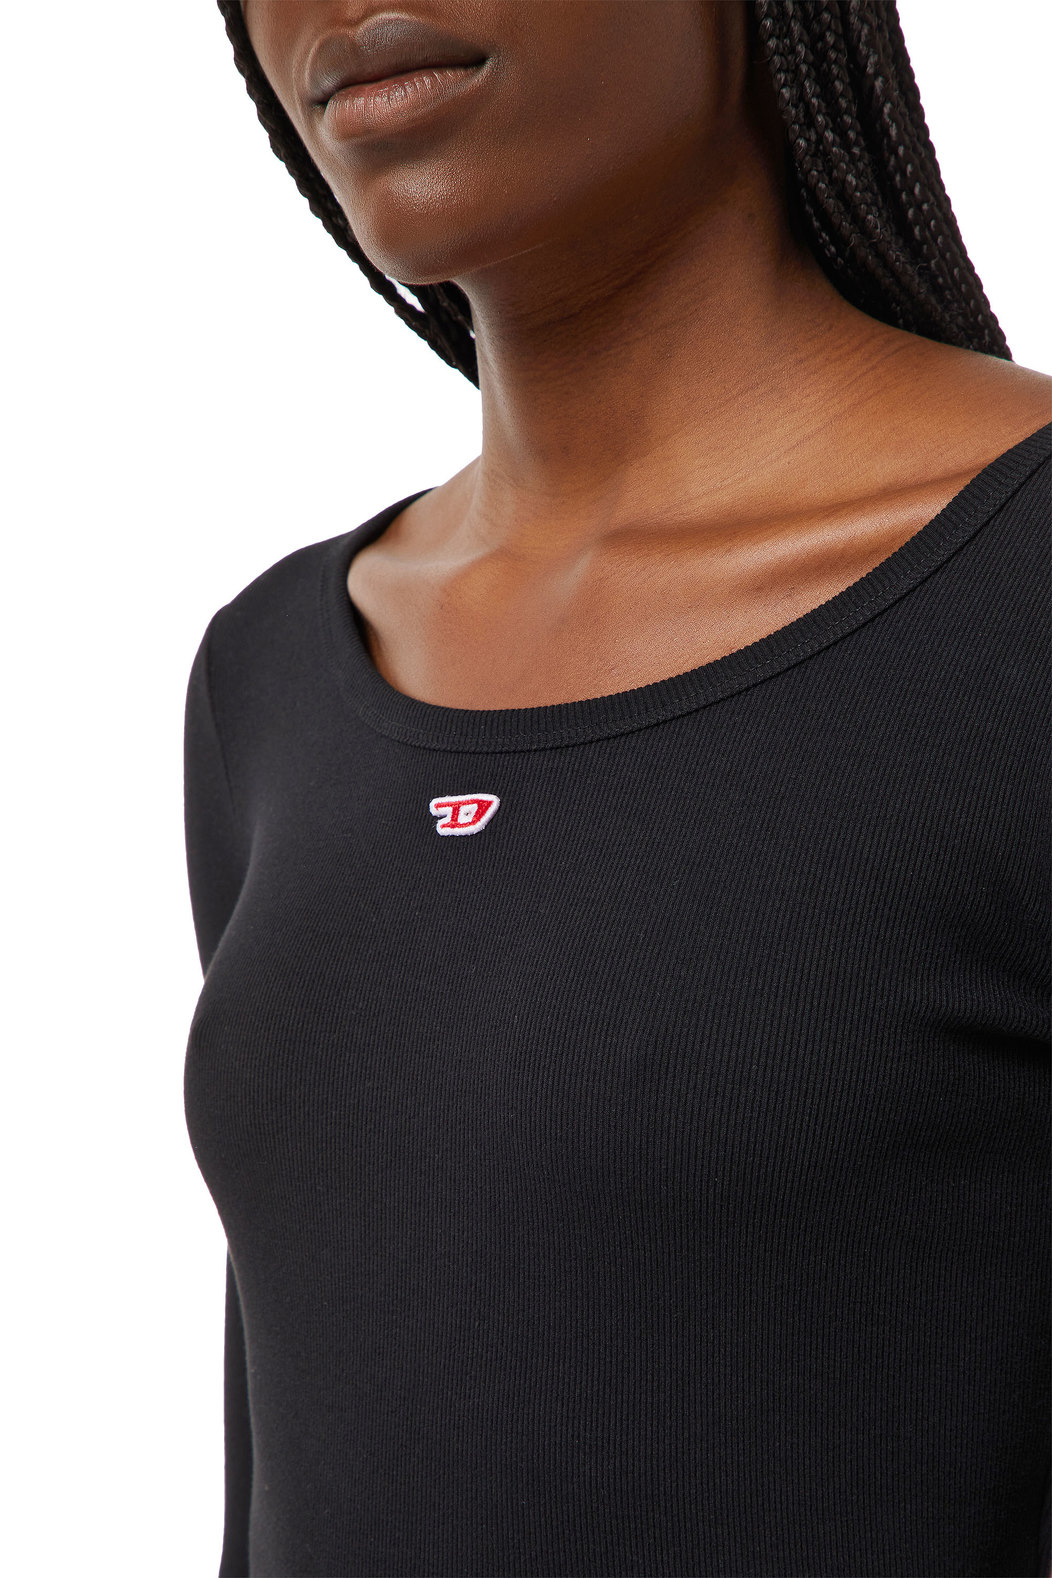 Long-sleeve top with D logo